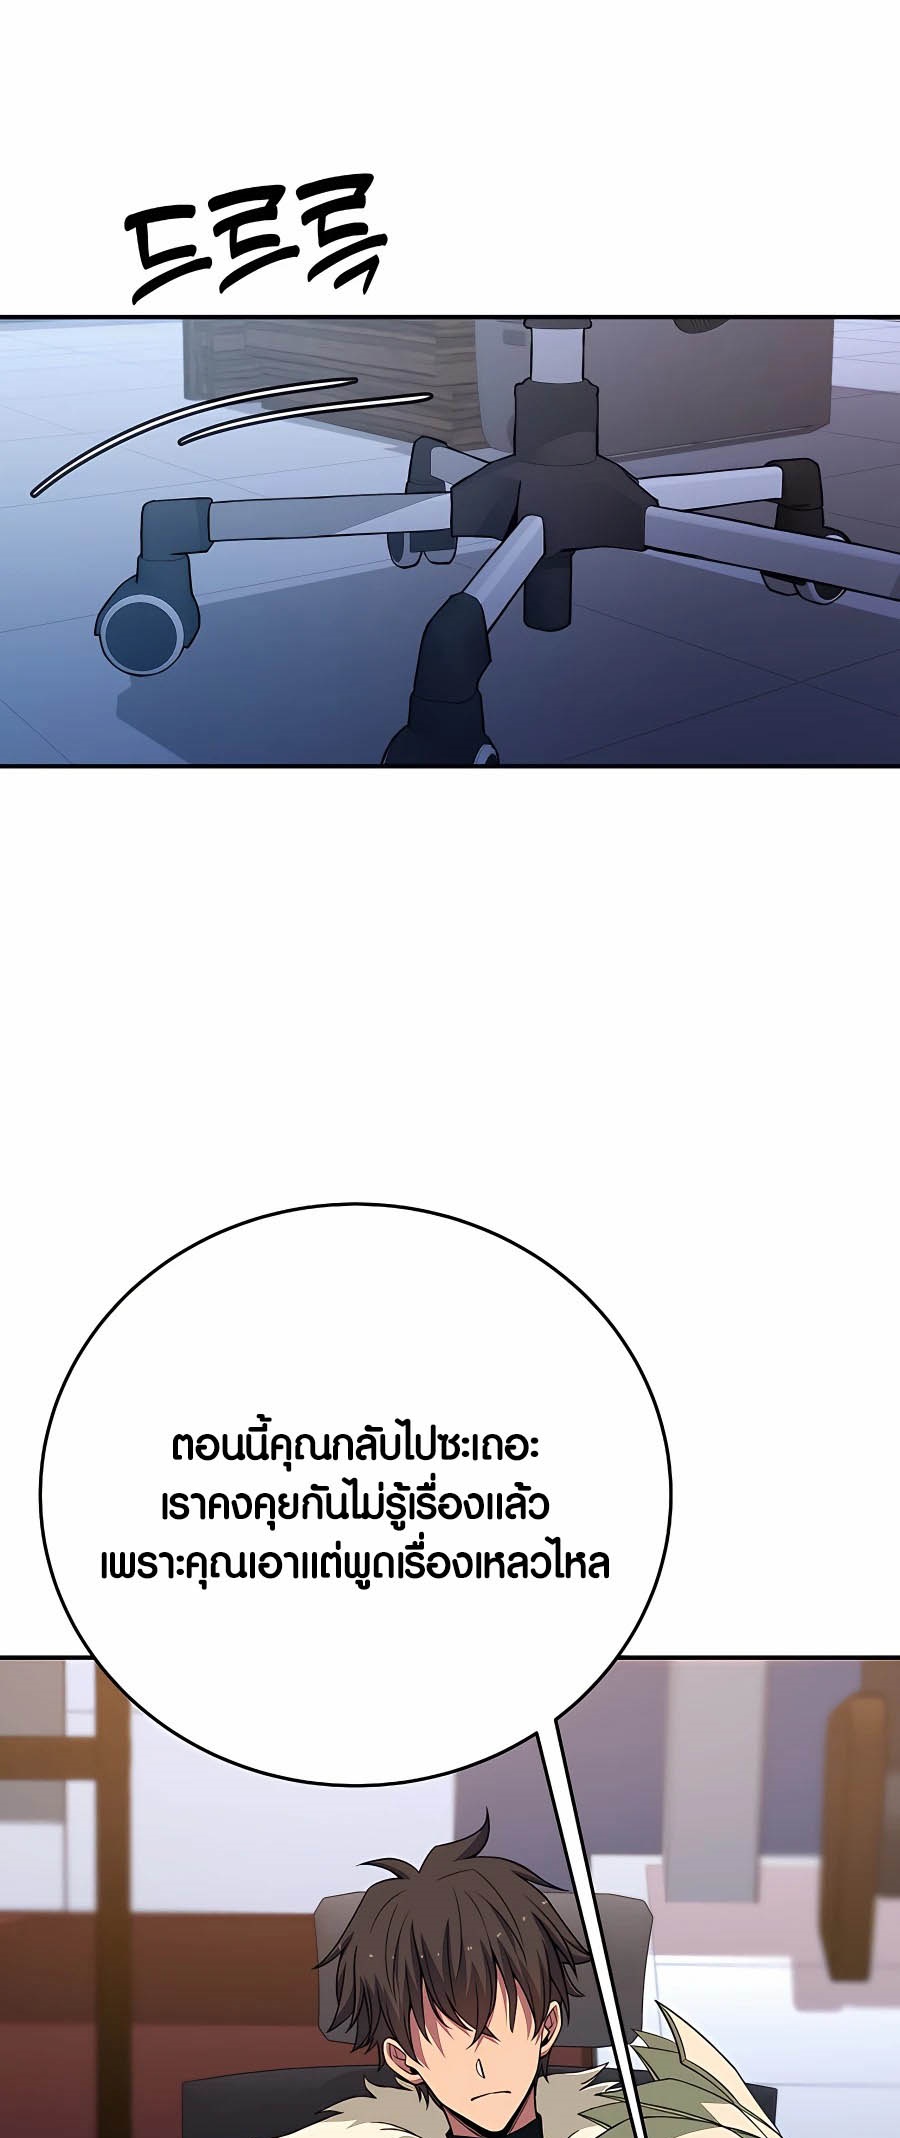 à¸­à¹ˆà¸²à¸™à¸¡à¸±à¸™à¸®à¸§à¸² à¹€à¸£à¸·à¹ˆà¸­à¸‡ The Part Time Land of the Gods 56 39